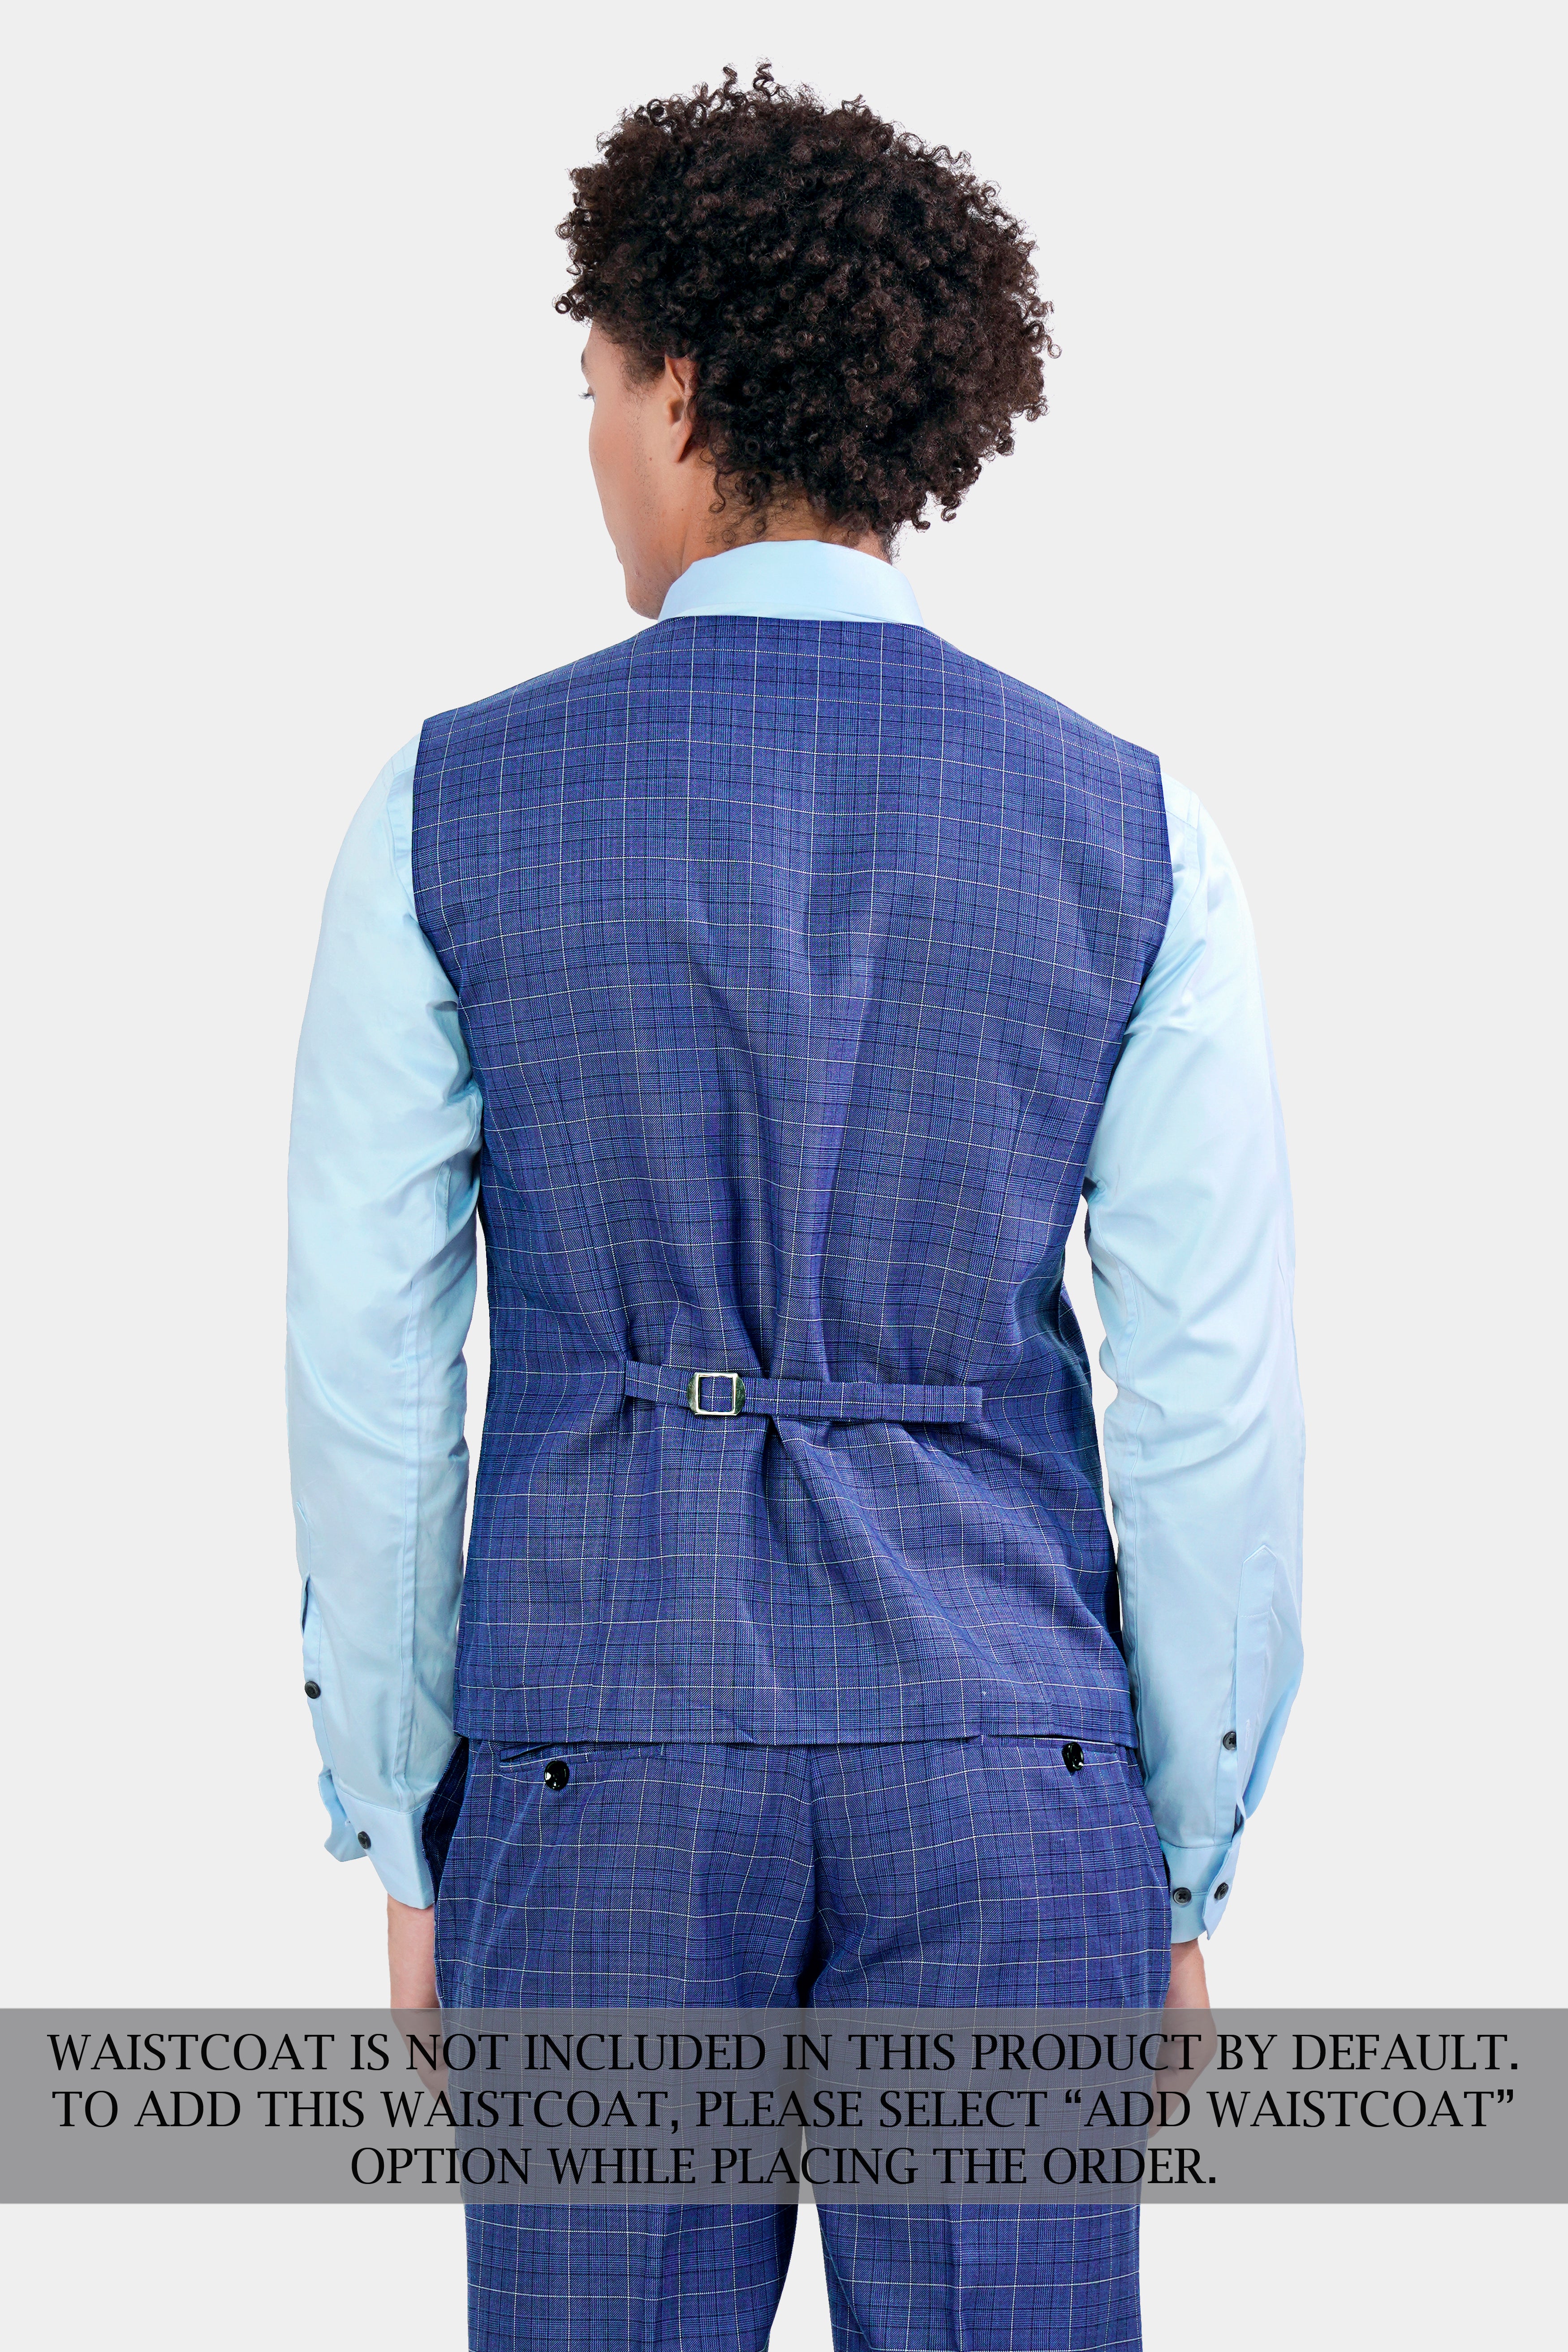 Yonder Blue Plaid Wool Rich Double Breasted Suit ST2944-DB-36, ST2944-DB-38, ST2944-DB-40, ST2944-DB-42, ST2944-DB-44, ST2944-DB-46, ST2944-DB-48, ST2944-DB-50, ST2944-DB-52, ST2944-DB-54, ST2944-DB-56, ST2944-DB-58, ST2944-DB-60